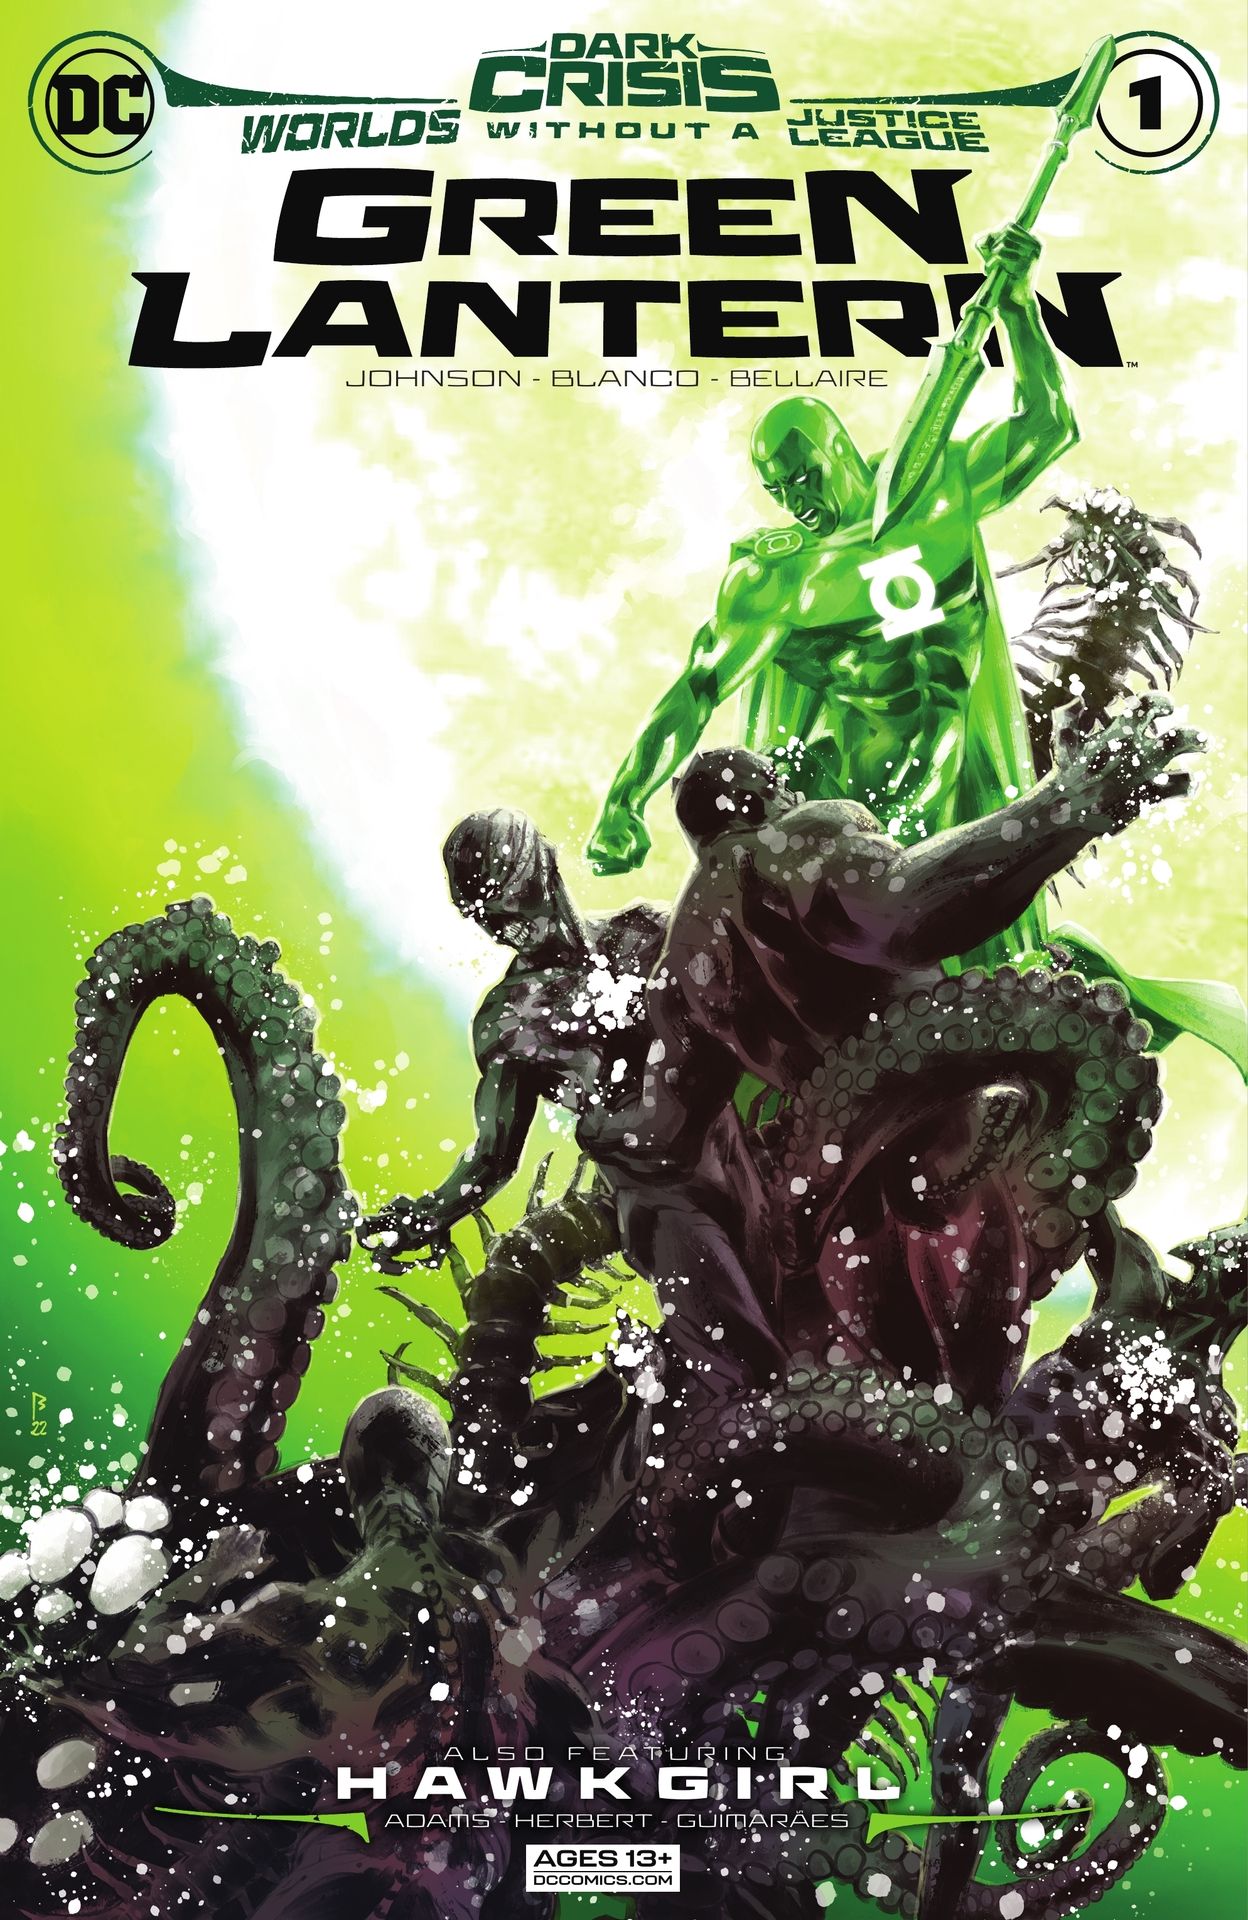 Read online Dark Crisis: Worlds Without a Justice League - Green Lantern comic -  Issue #1 - 1